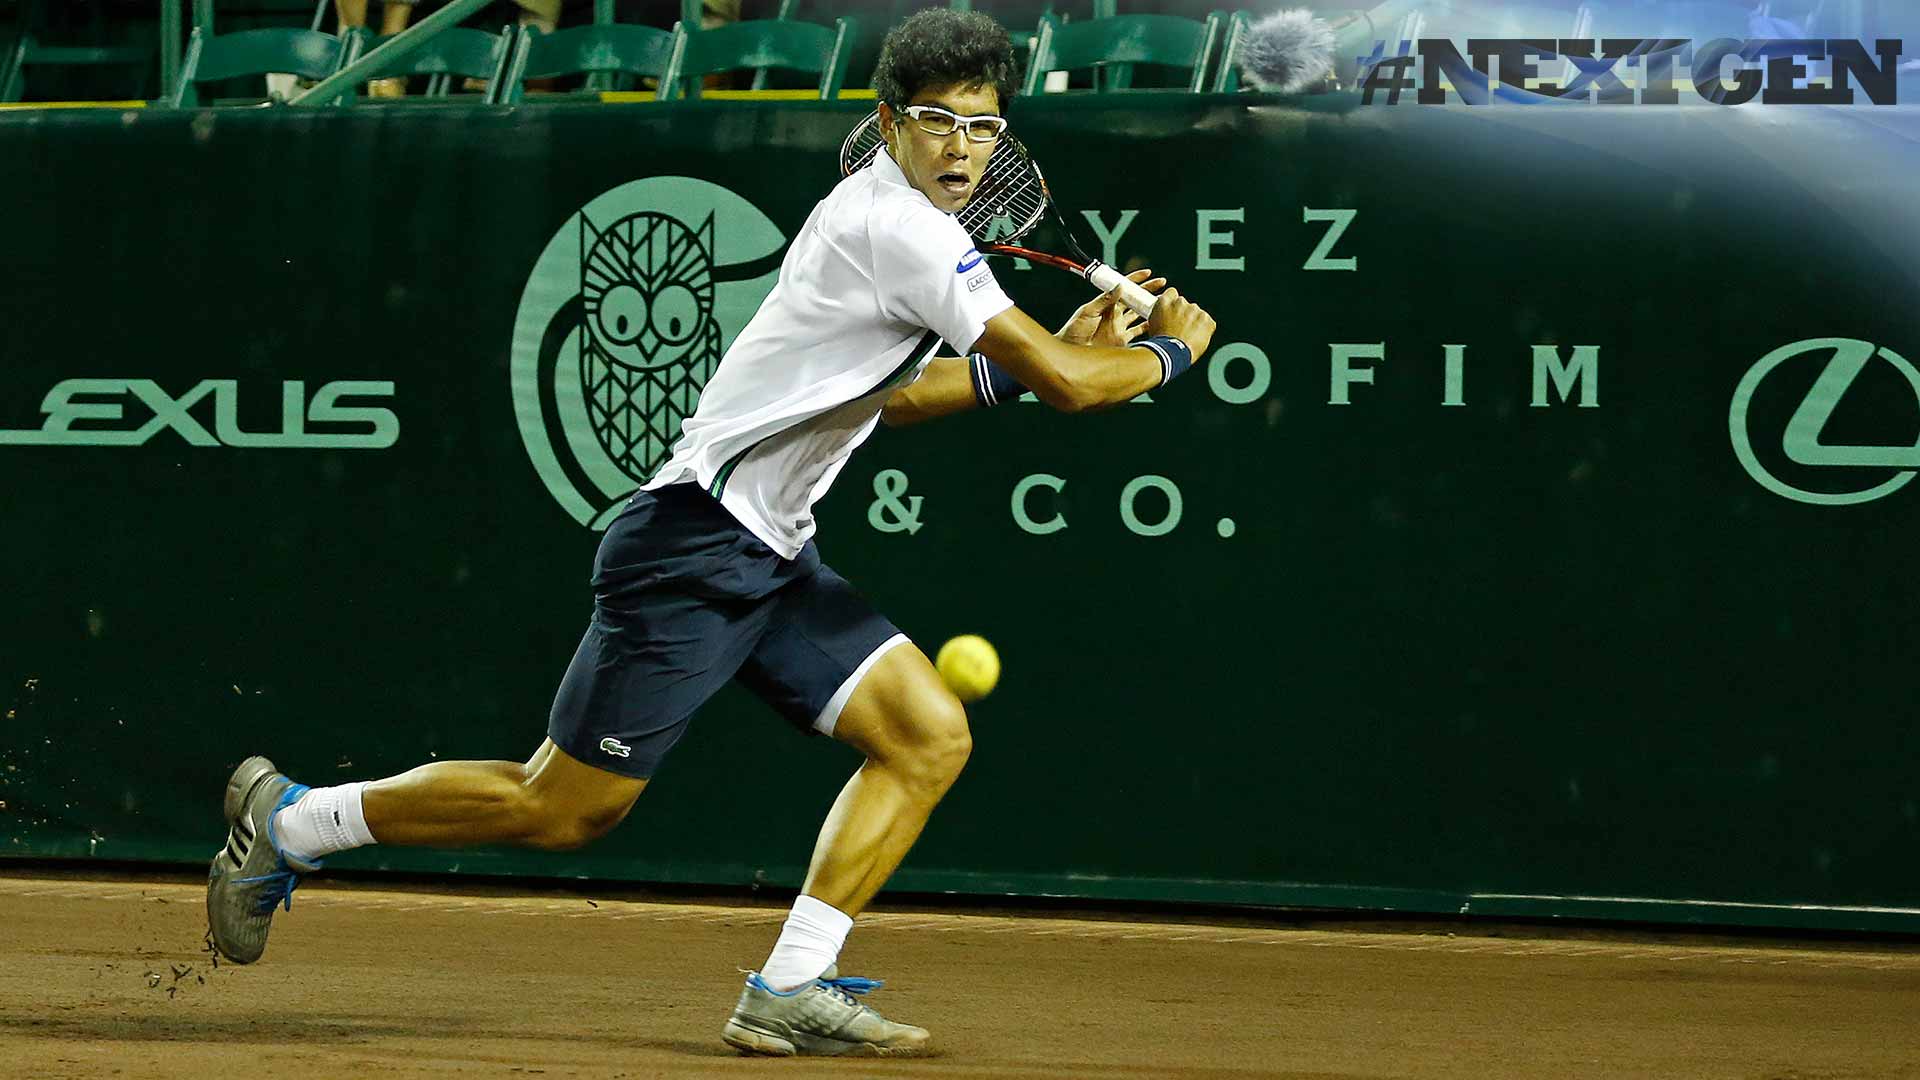 best wallpaper image about Hyeon Chung tennis player